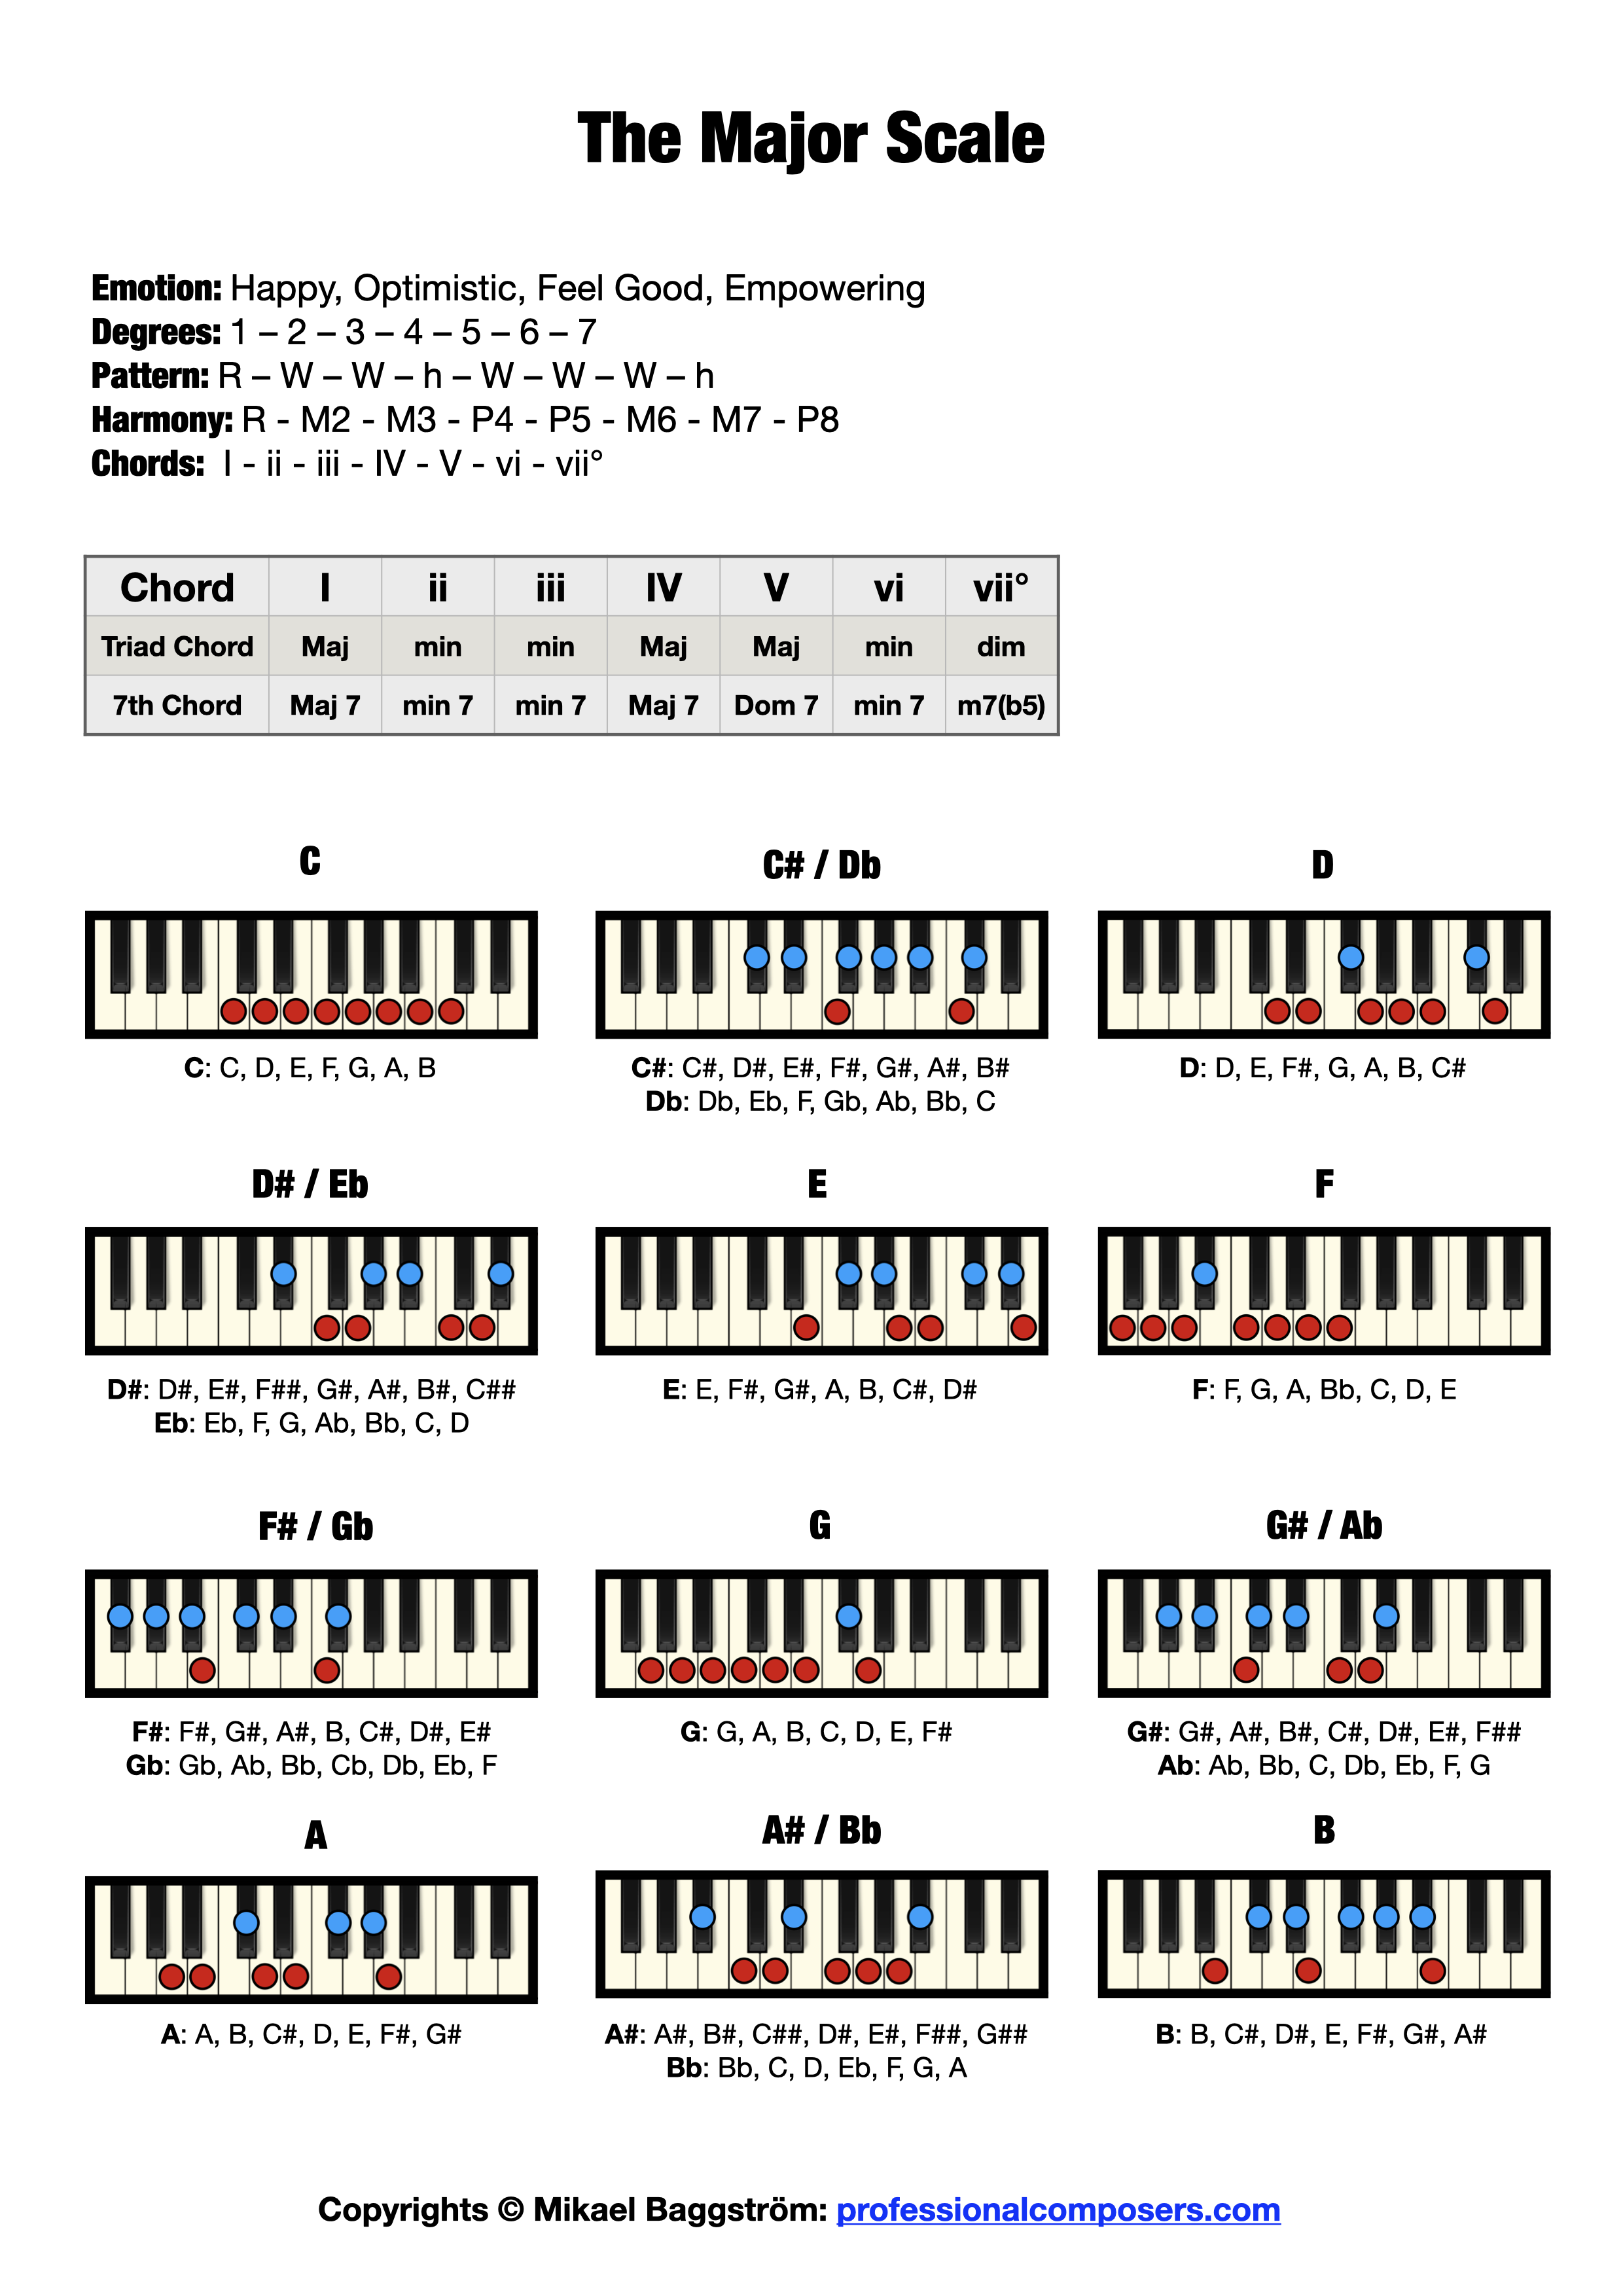 The Major Scale on Piano (Free Chart + Pictures) Professional Composers